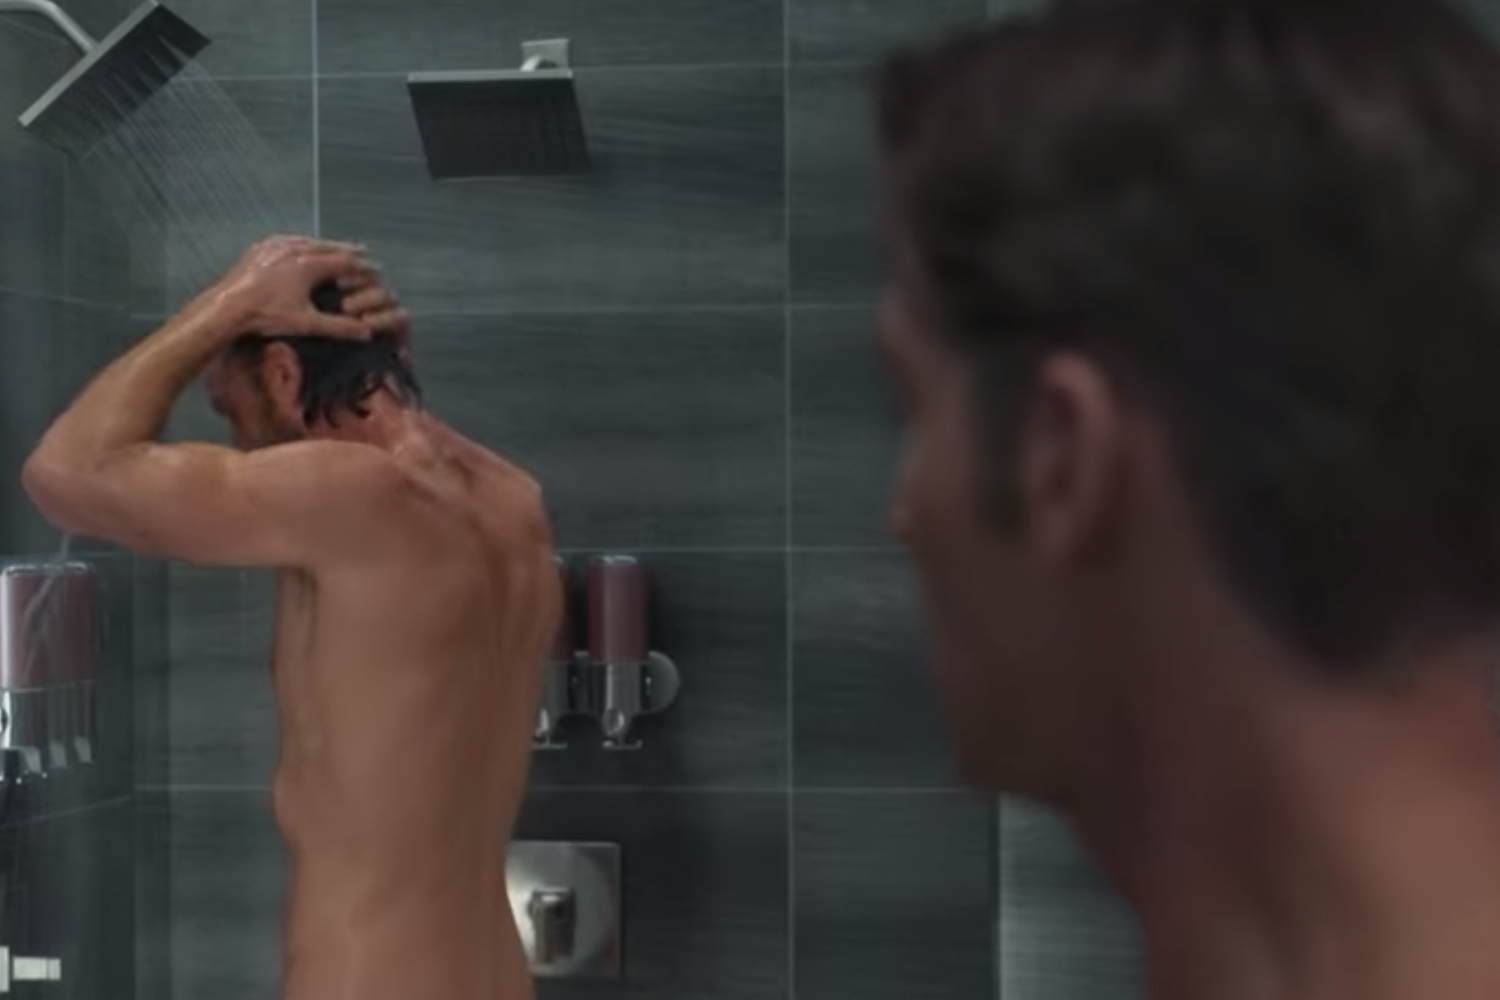 The now infamous shower scene from Netflix's "Sex/Life"